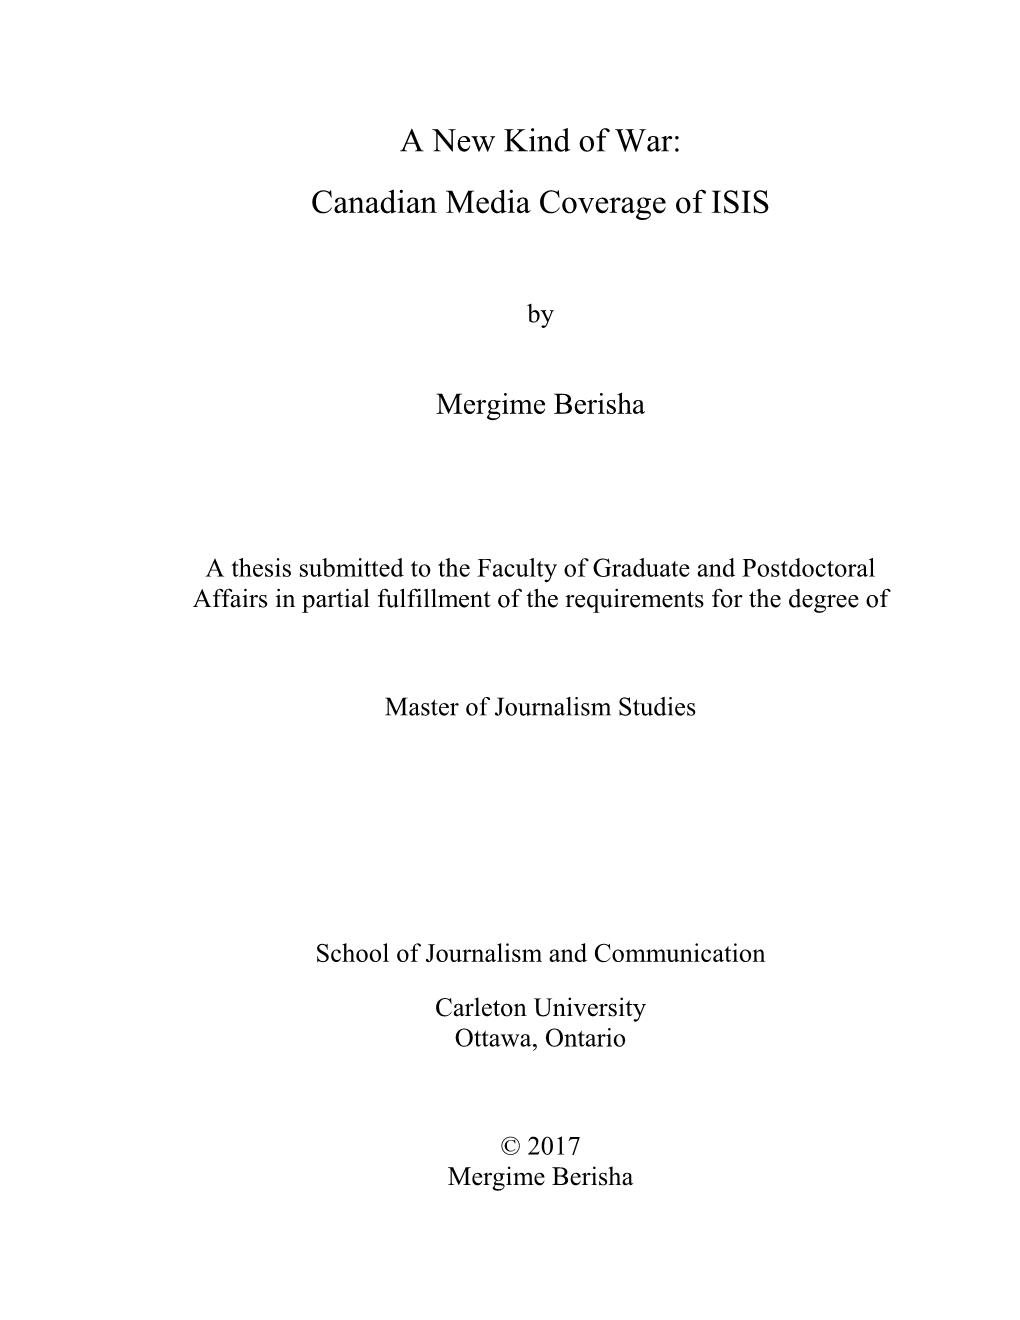 A New Kind of War: Canadian Media Coverage of ISIS